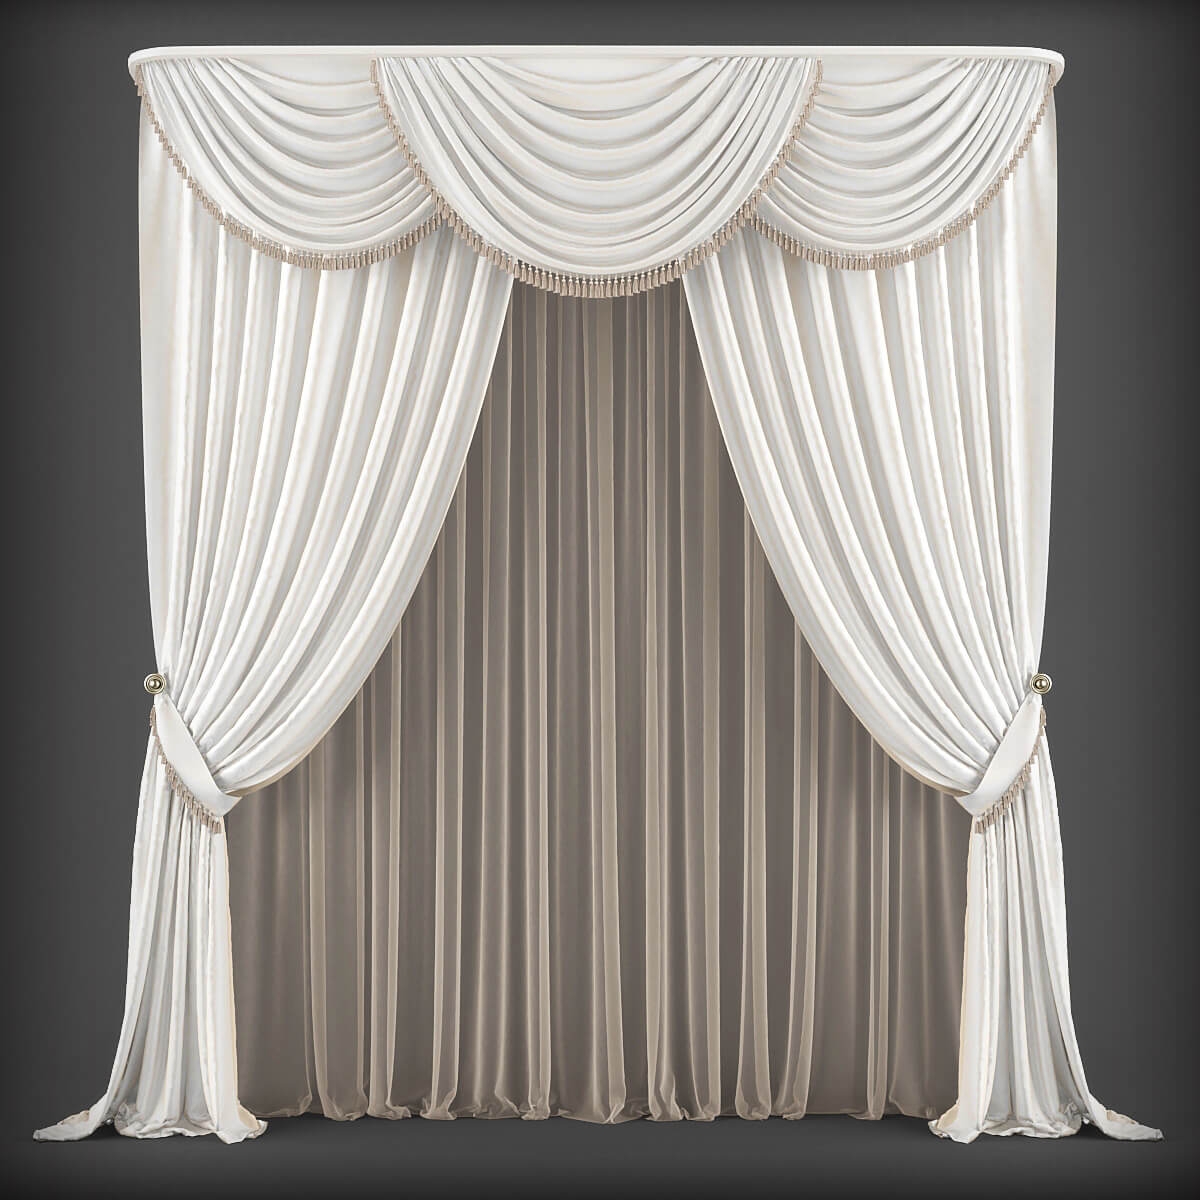 Discover a Wide Range of Classic Curtain Styles